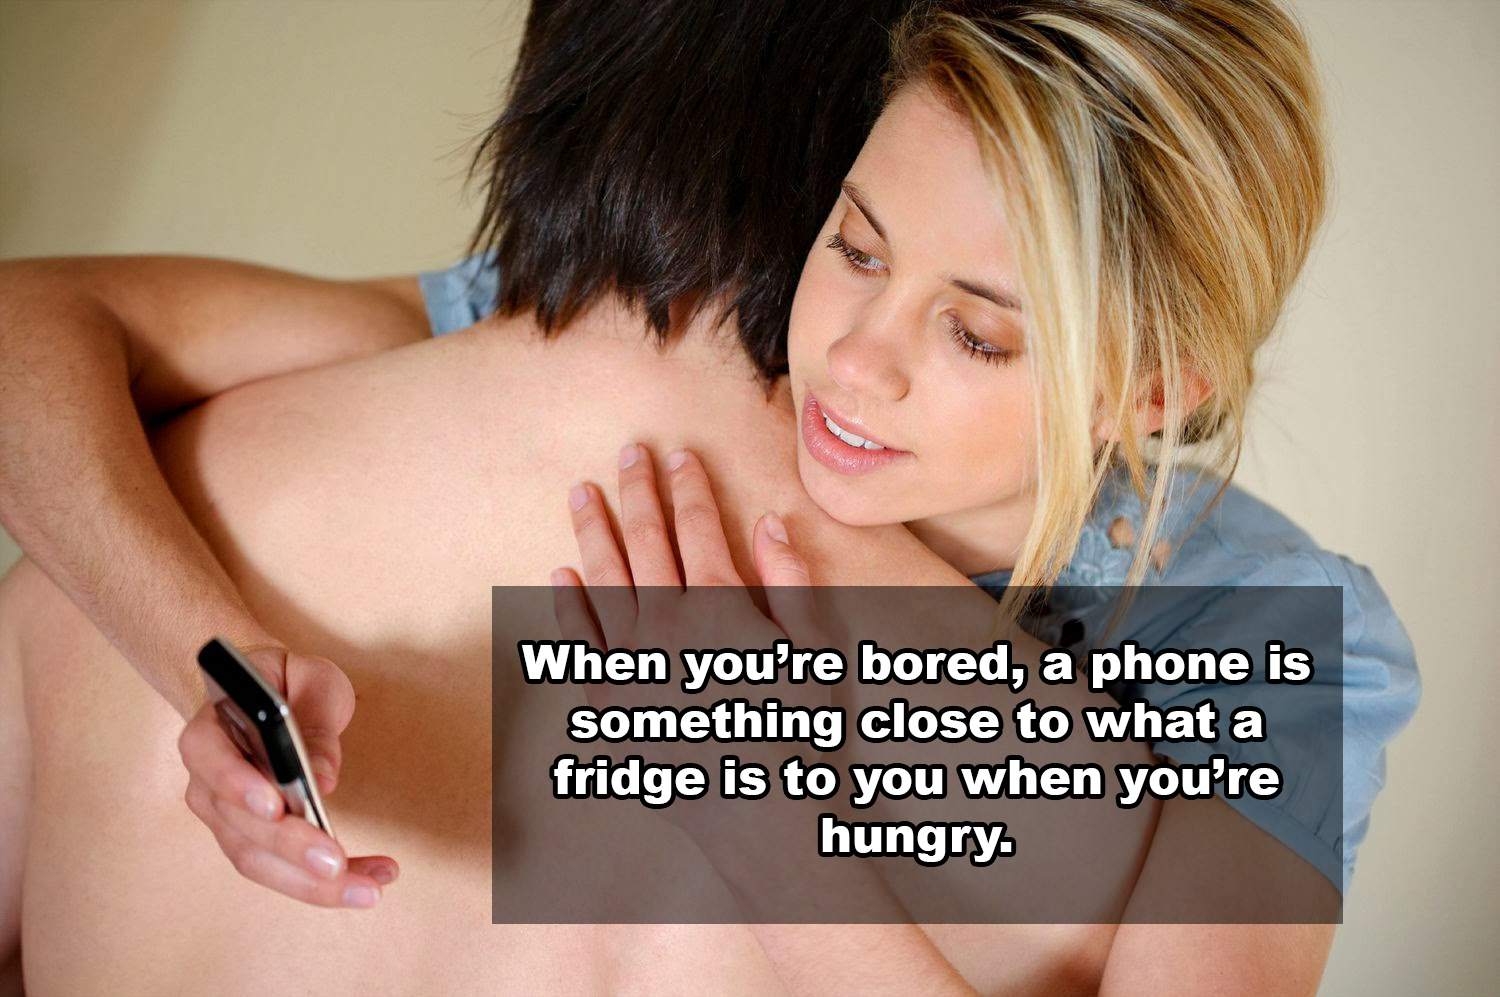 girl - When you're bored, a phone is something close to what a fridge is to you when you're hungry.